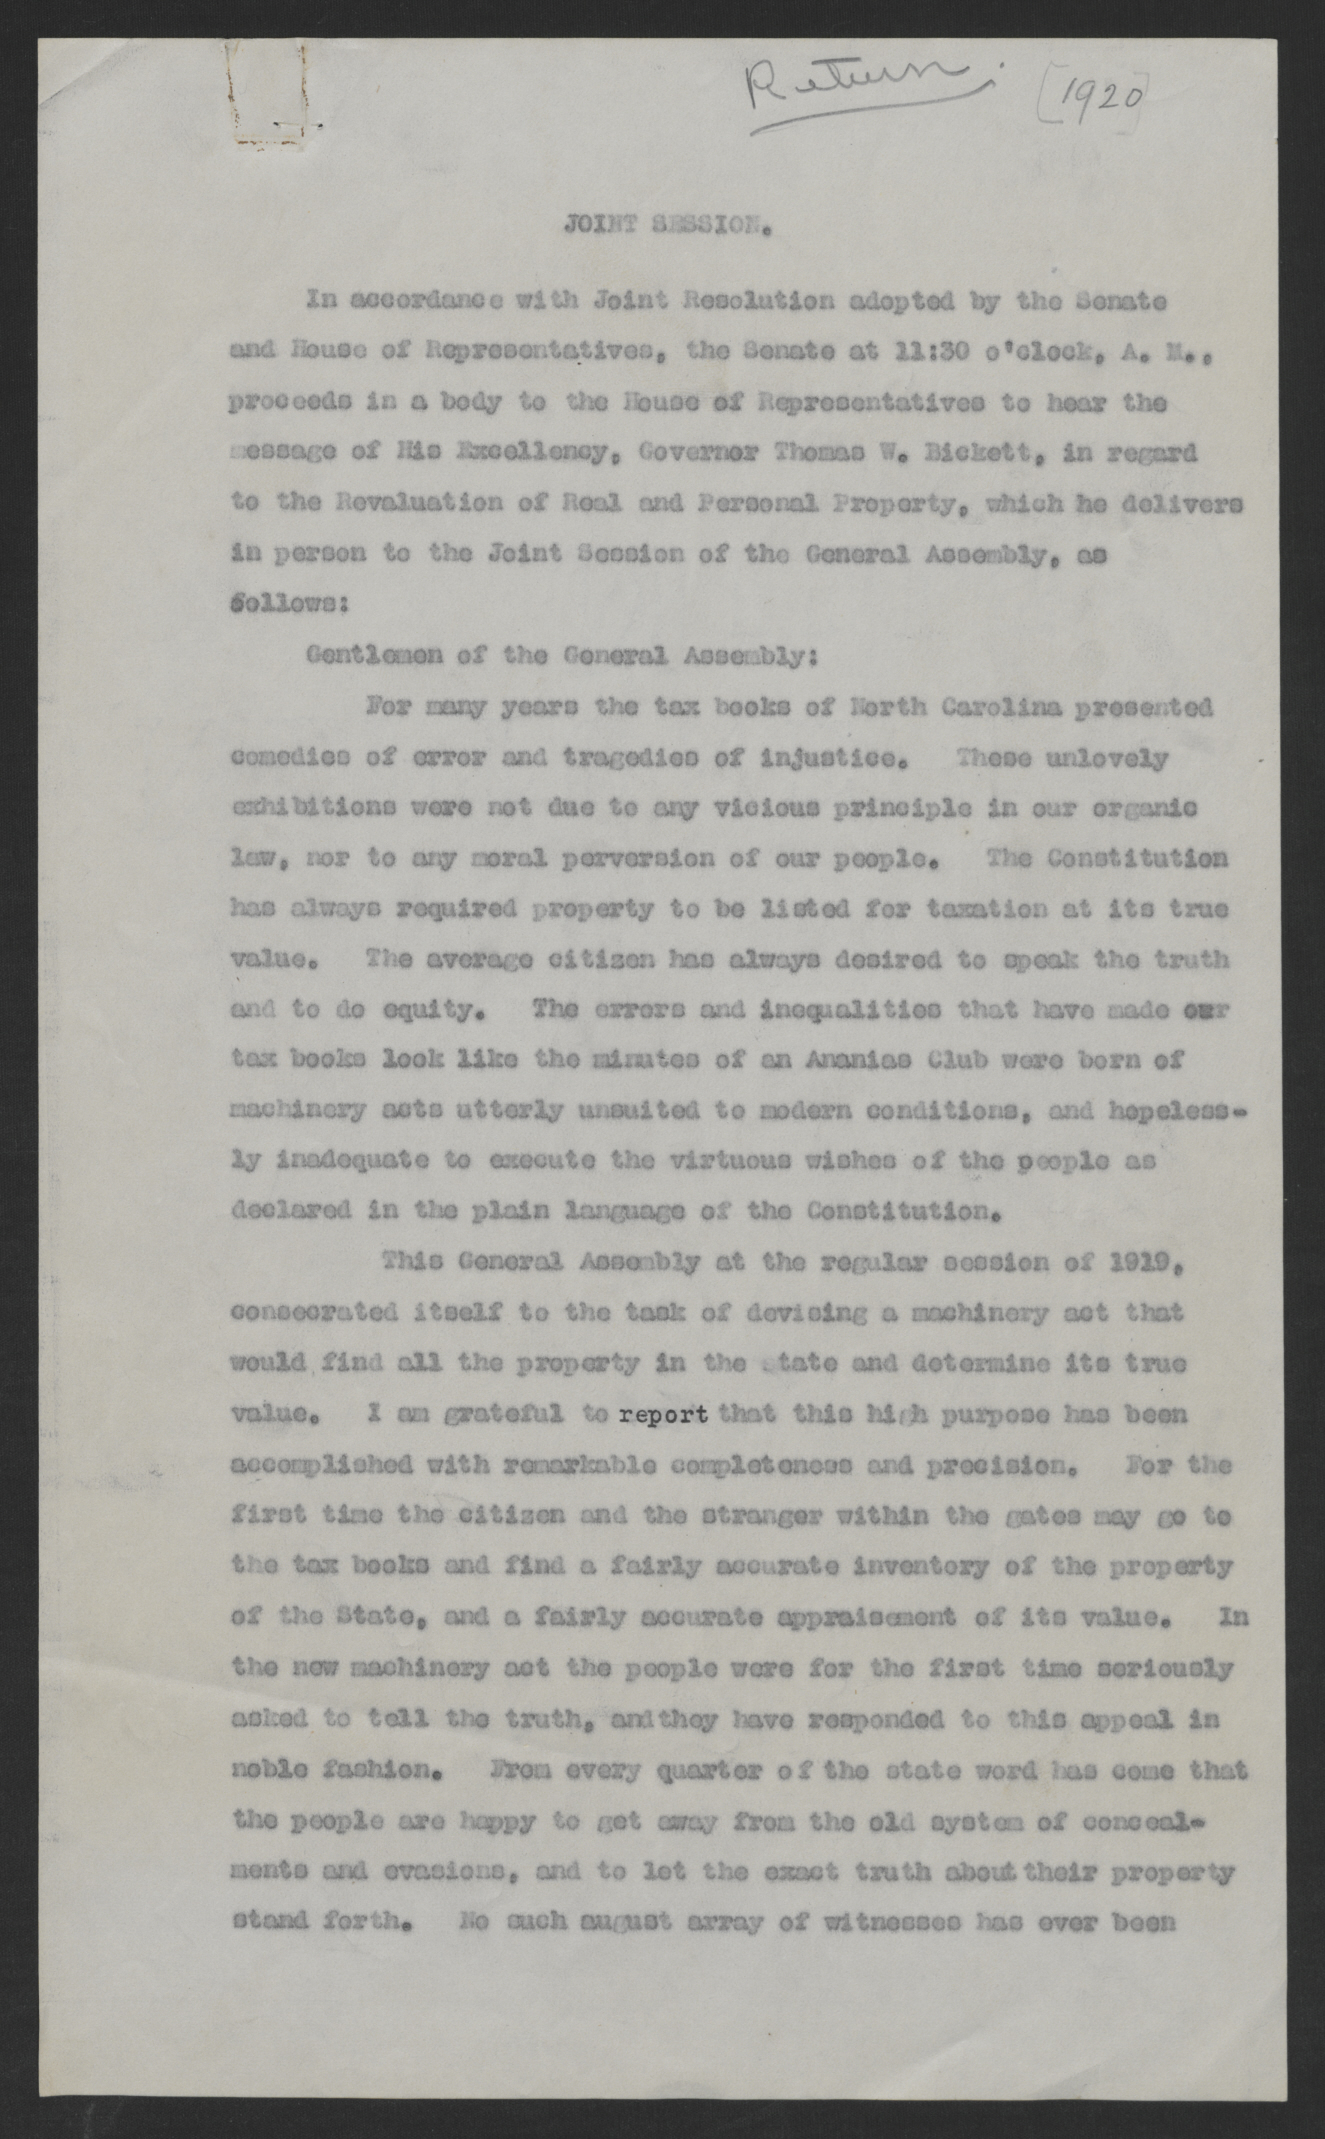 First Message of Governor Bickett to the Special Session of the General Assembly, August 10, 1920, page 1